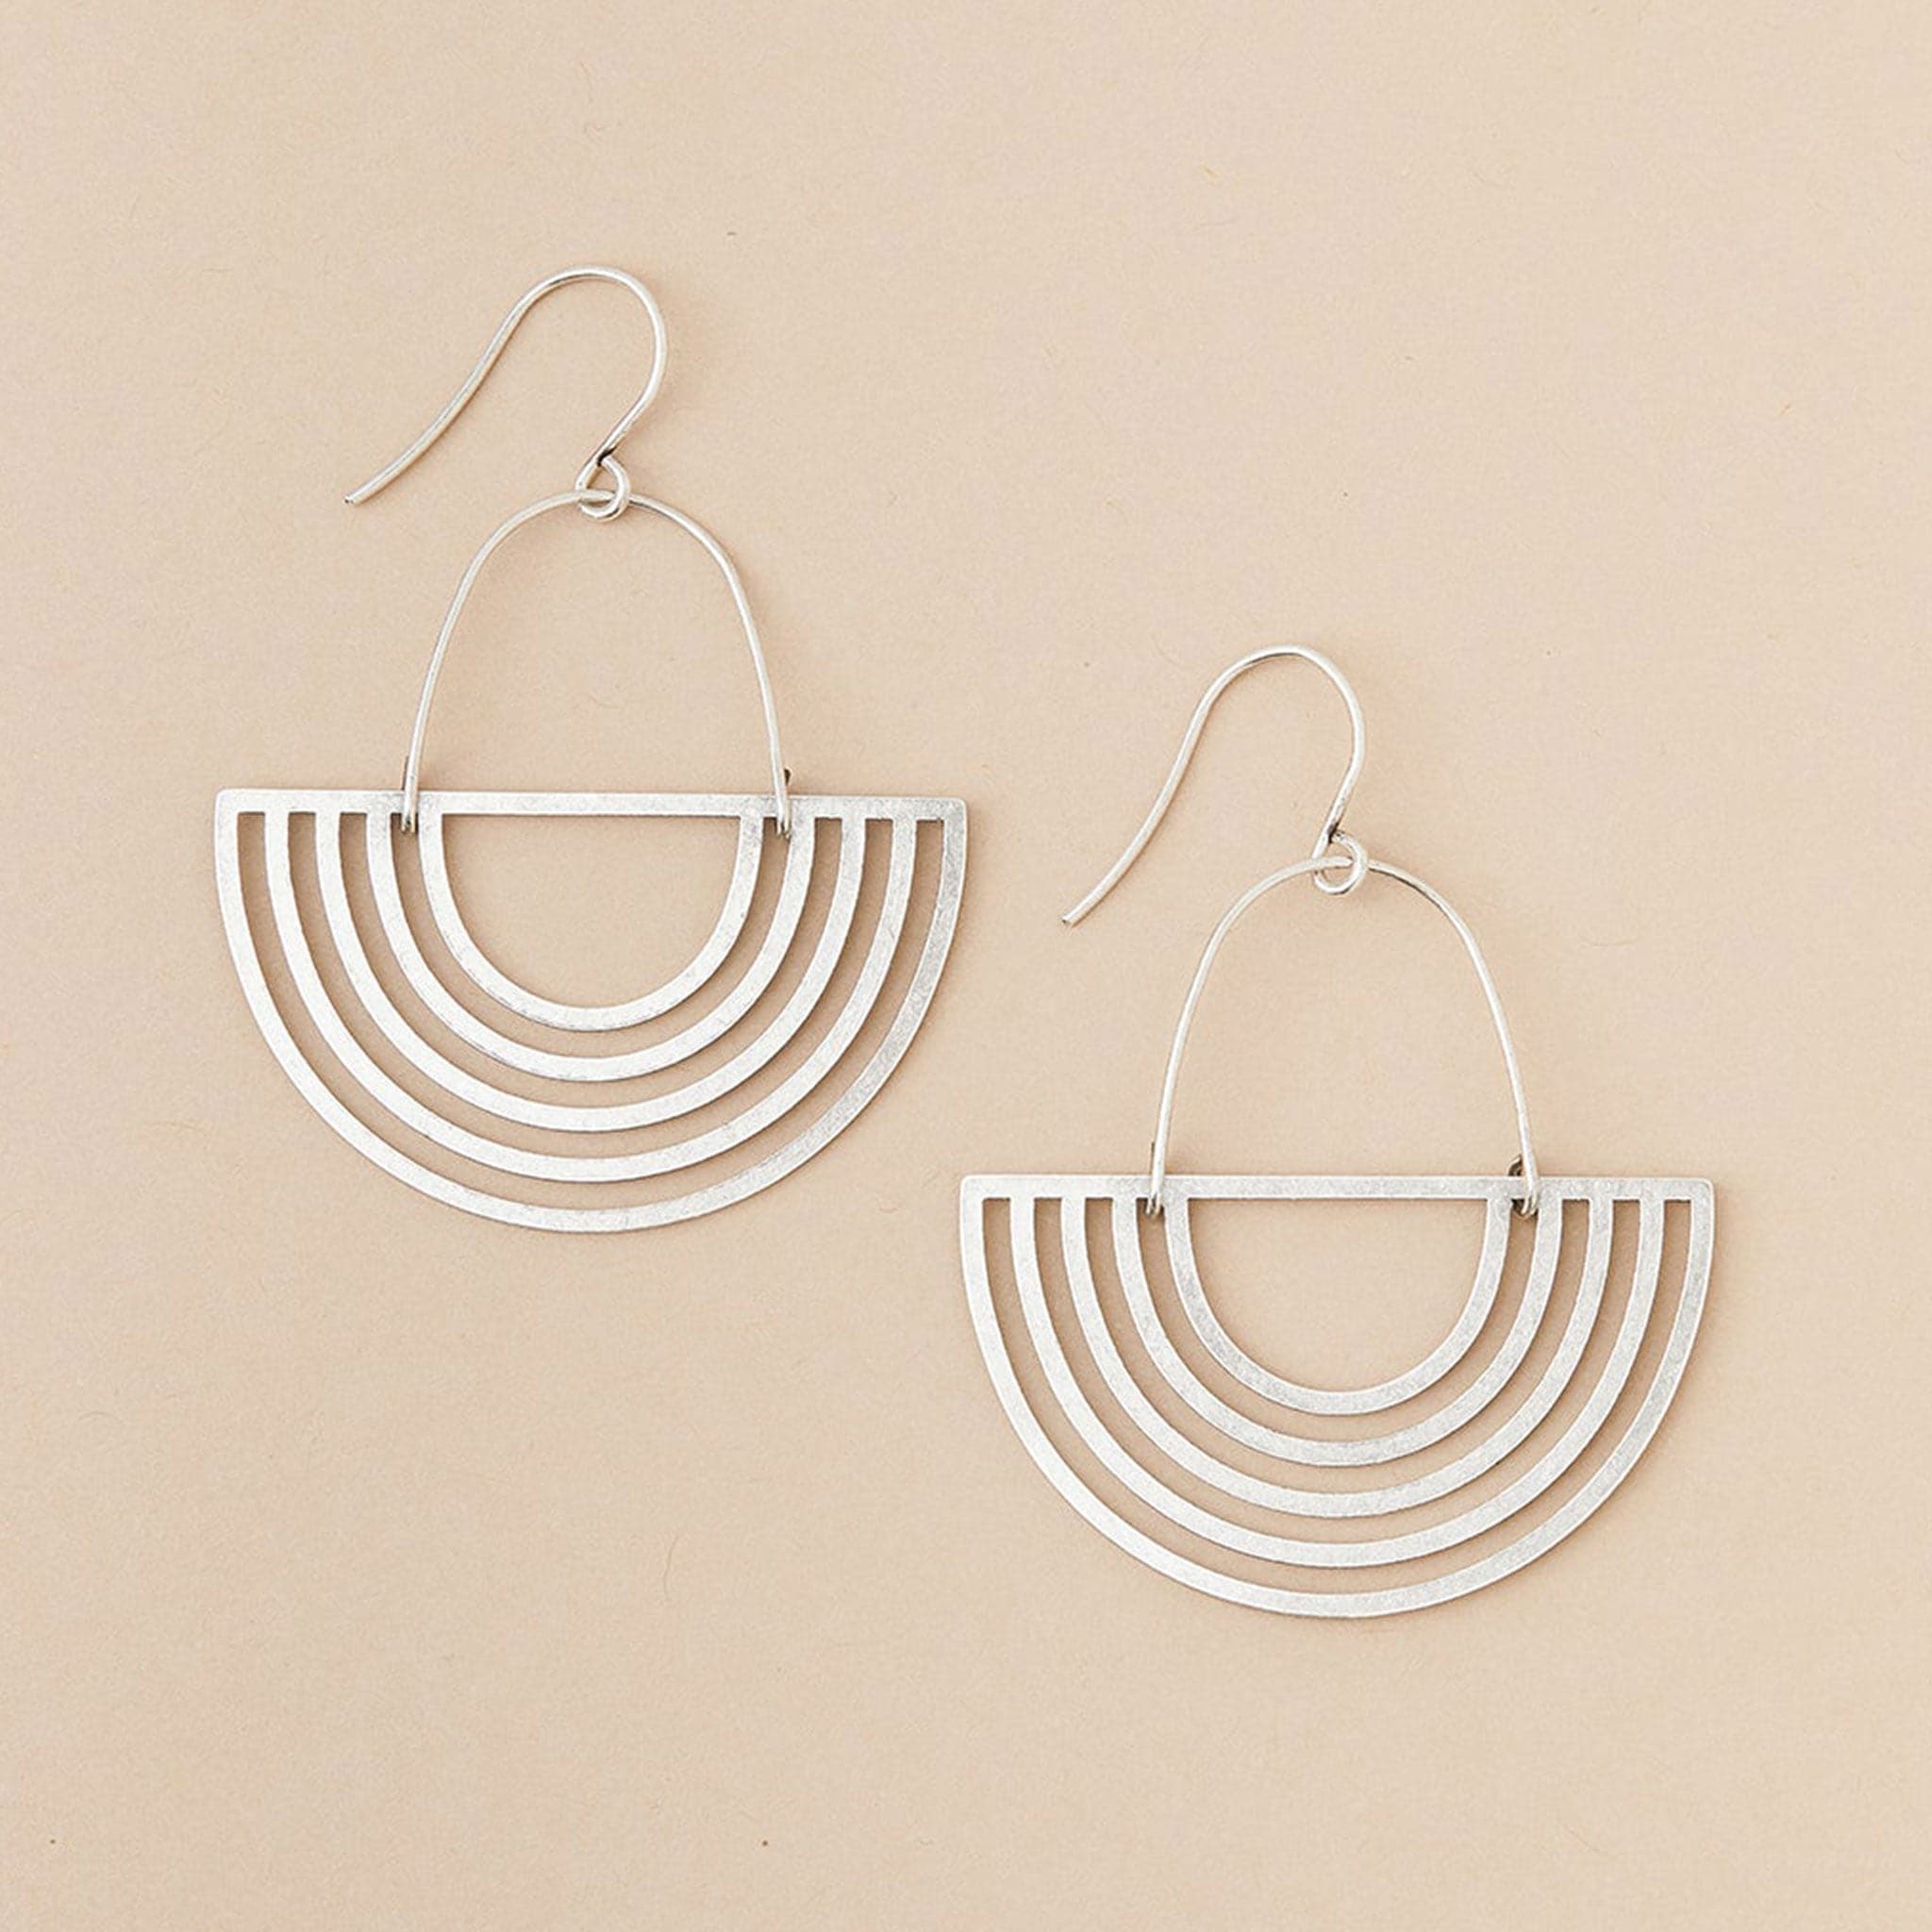 Two silver upside down arch earrings with a silver wire finding.